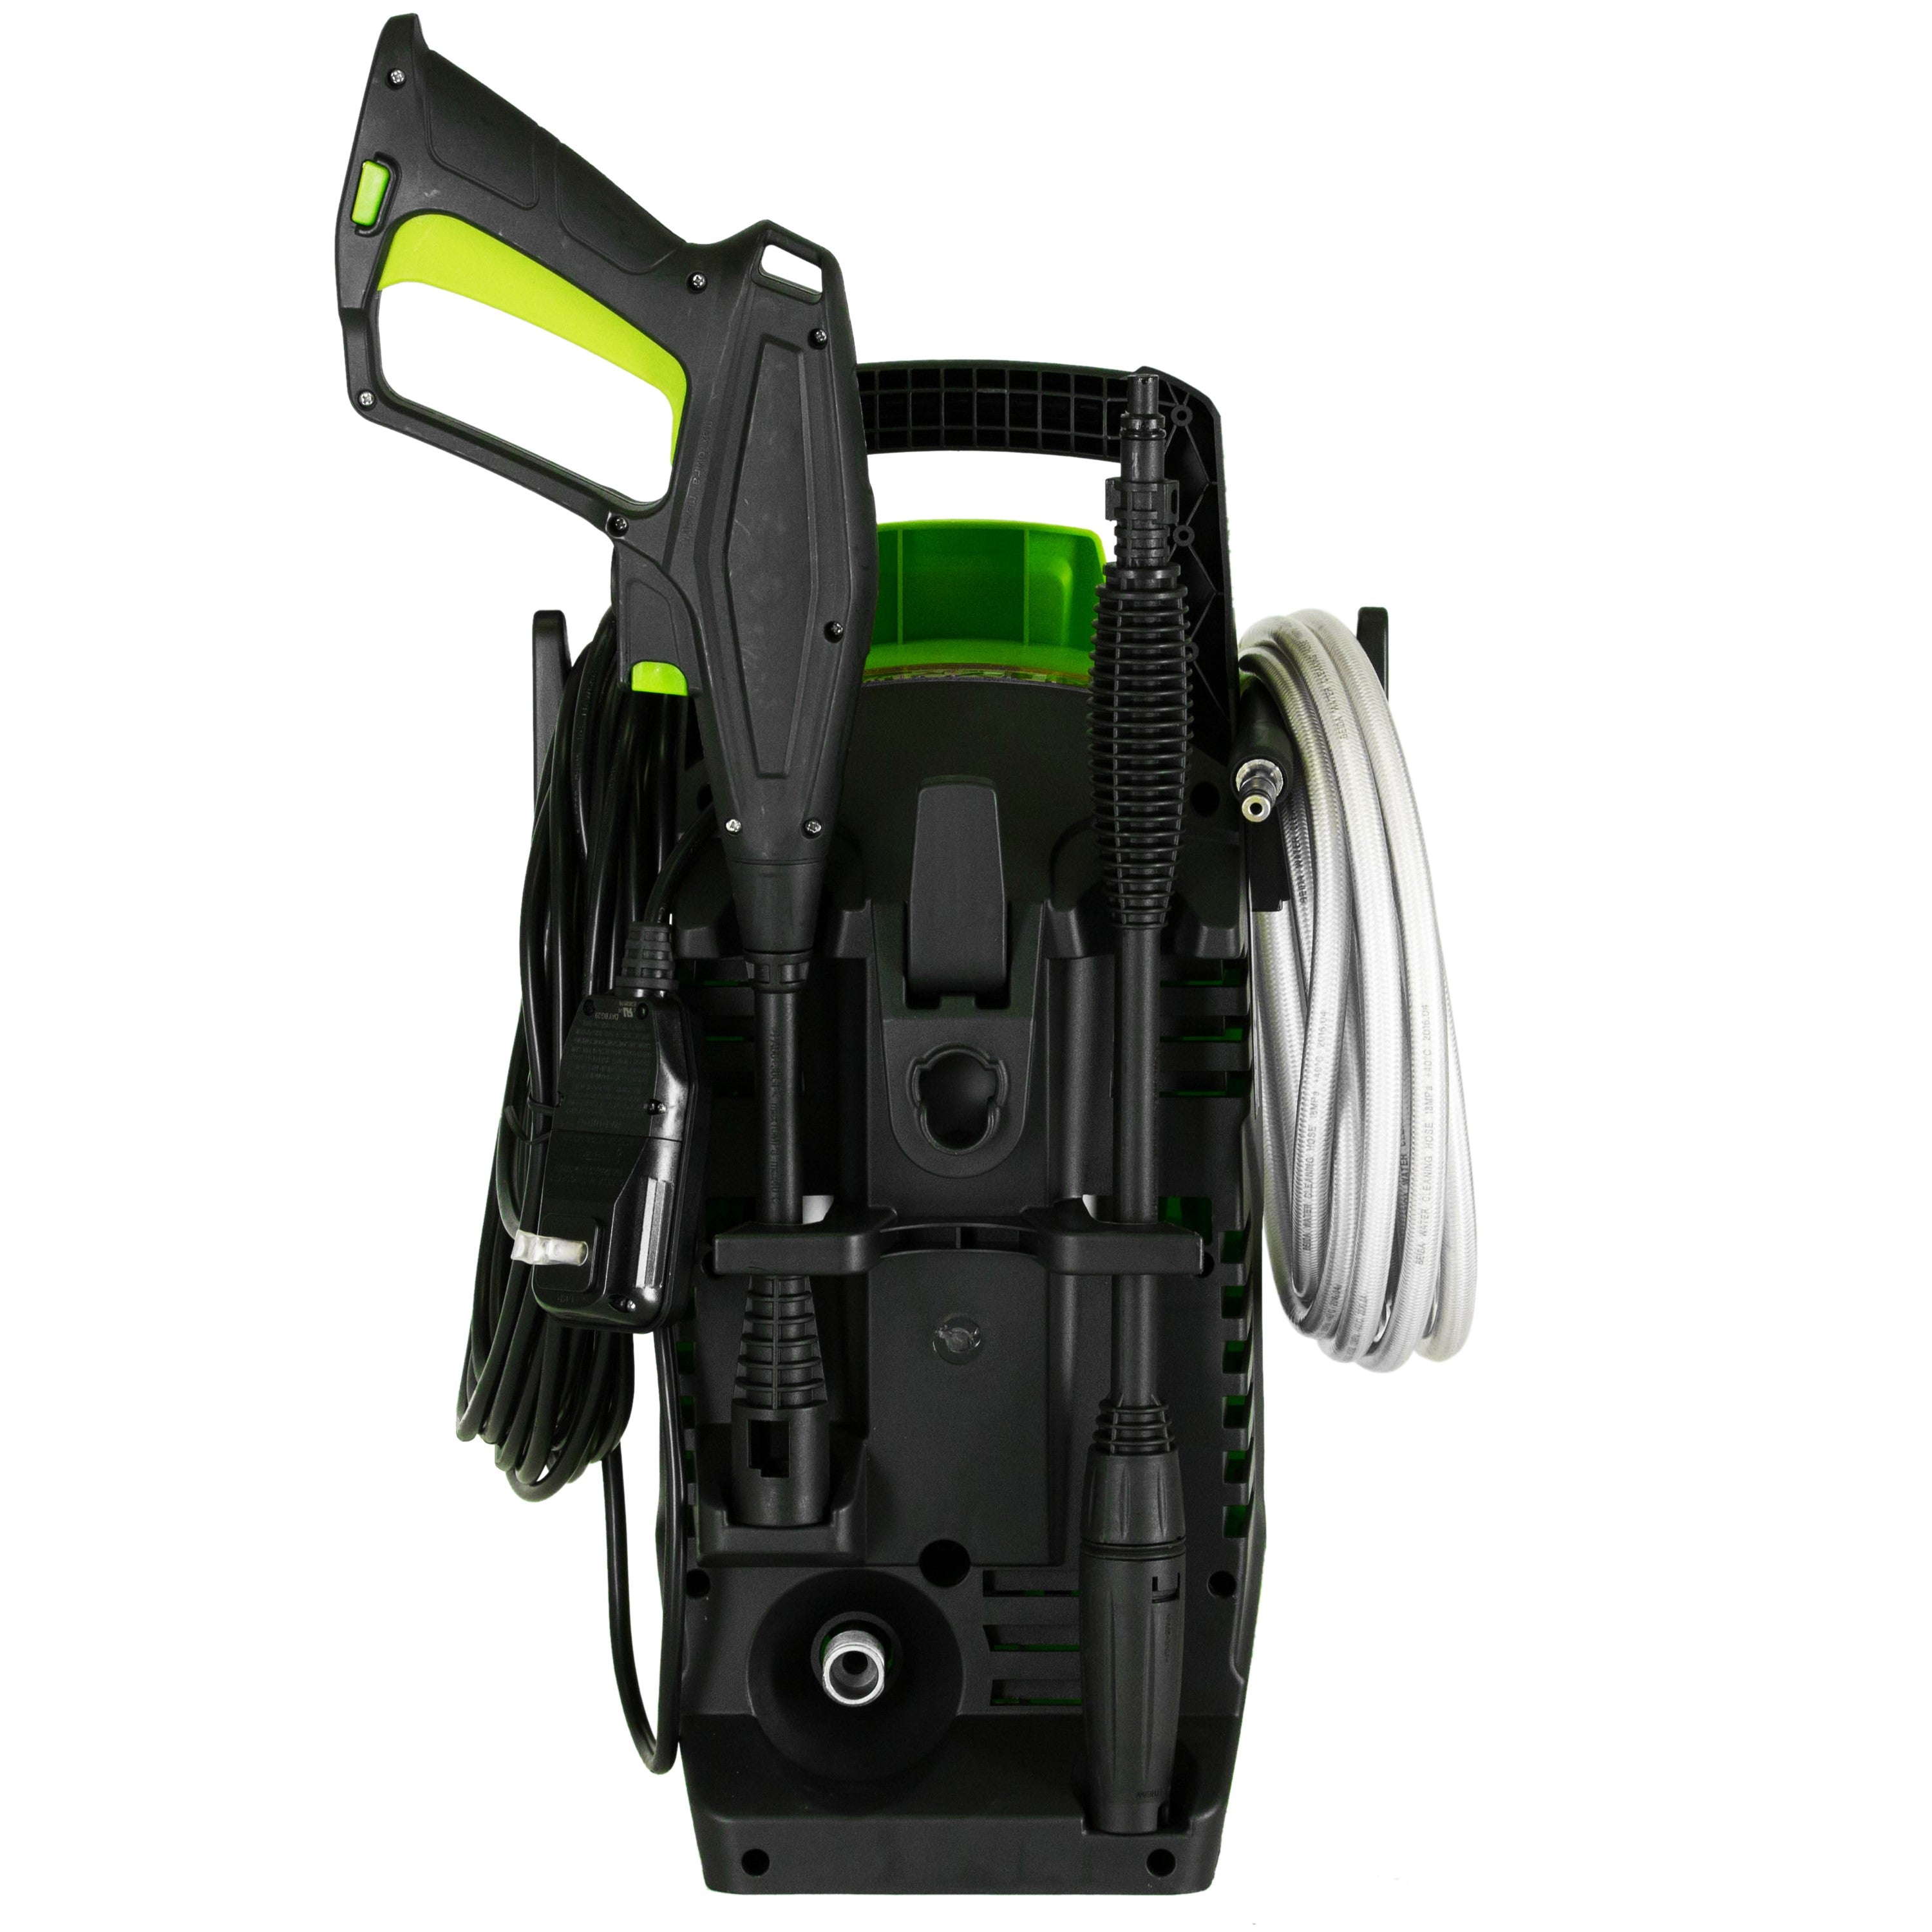 Earthwise Power Tools by ALM 1500 PSI 10-Amp 120V Corded Pressure Washer